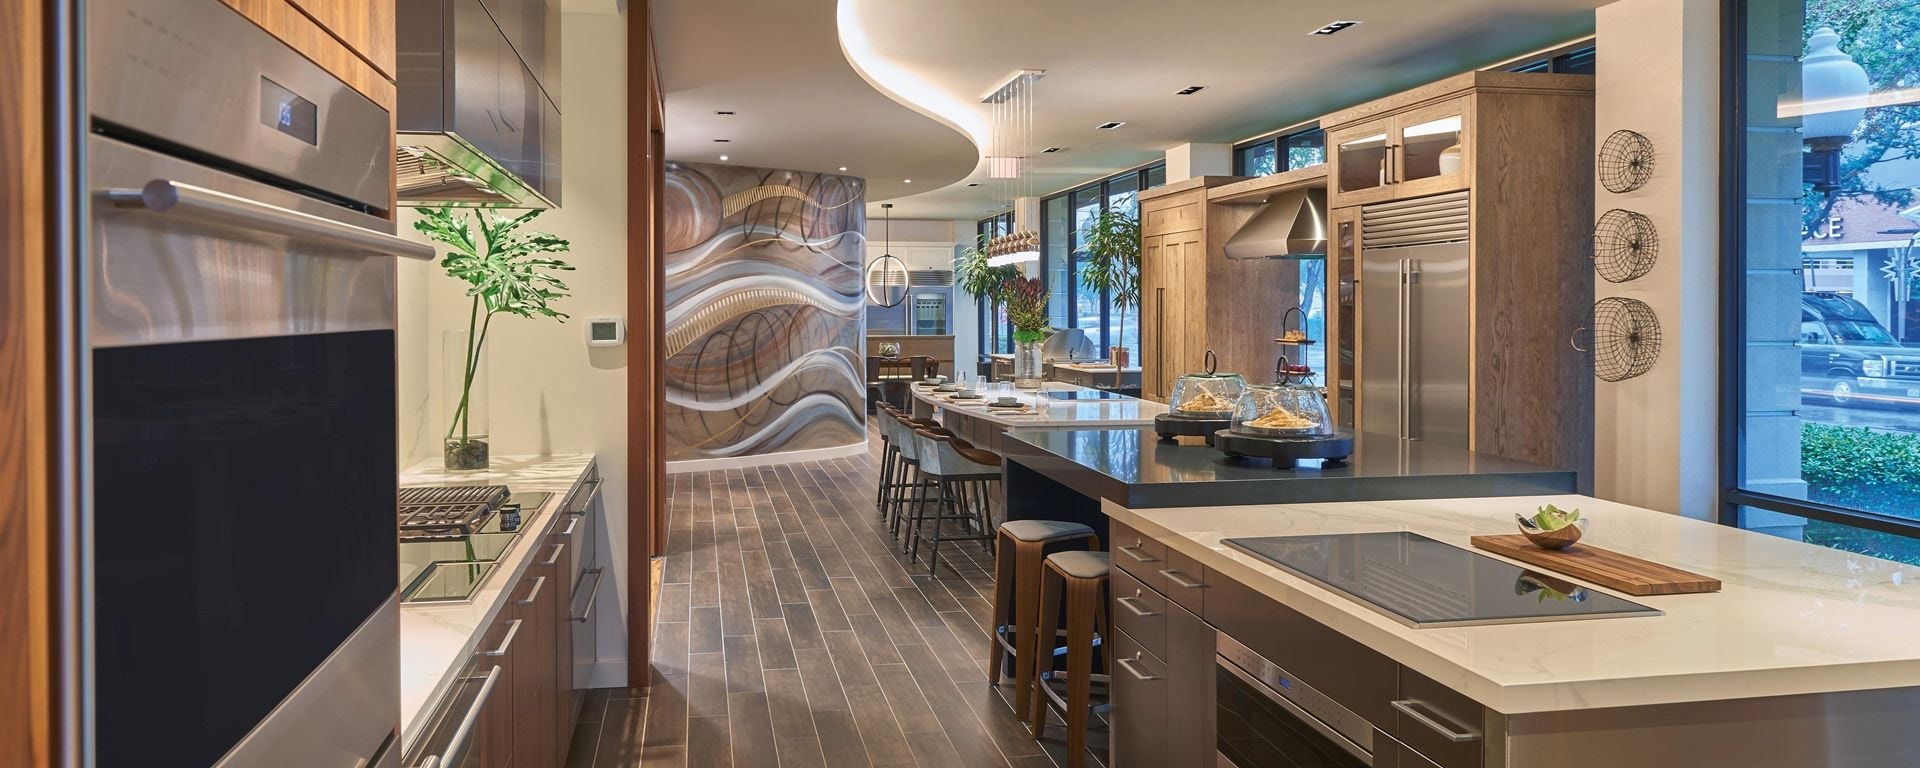 Explore luxury kitchen appliances in person at the Sub-Zero, Wolf, and Cove Showroom located in Houston, Texas